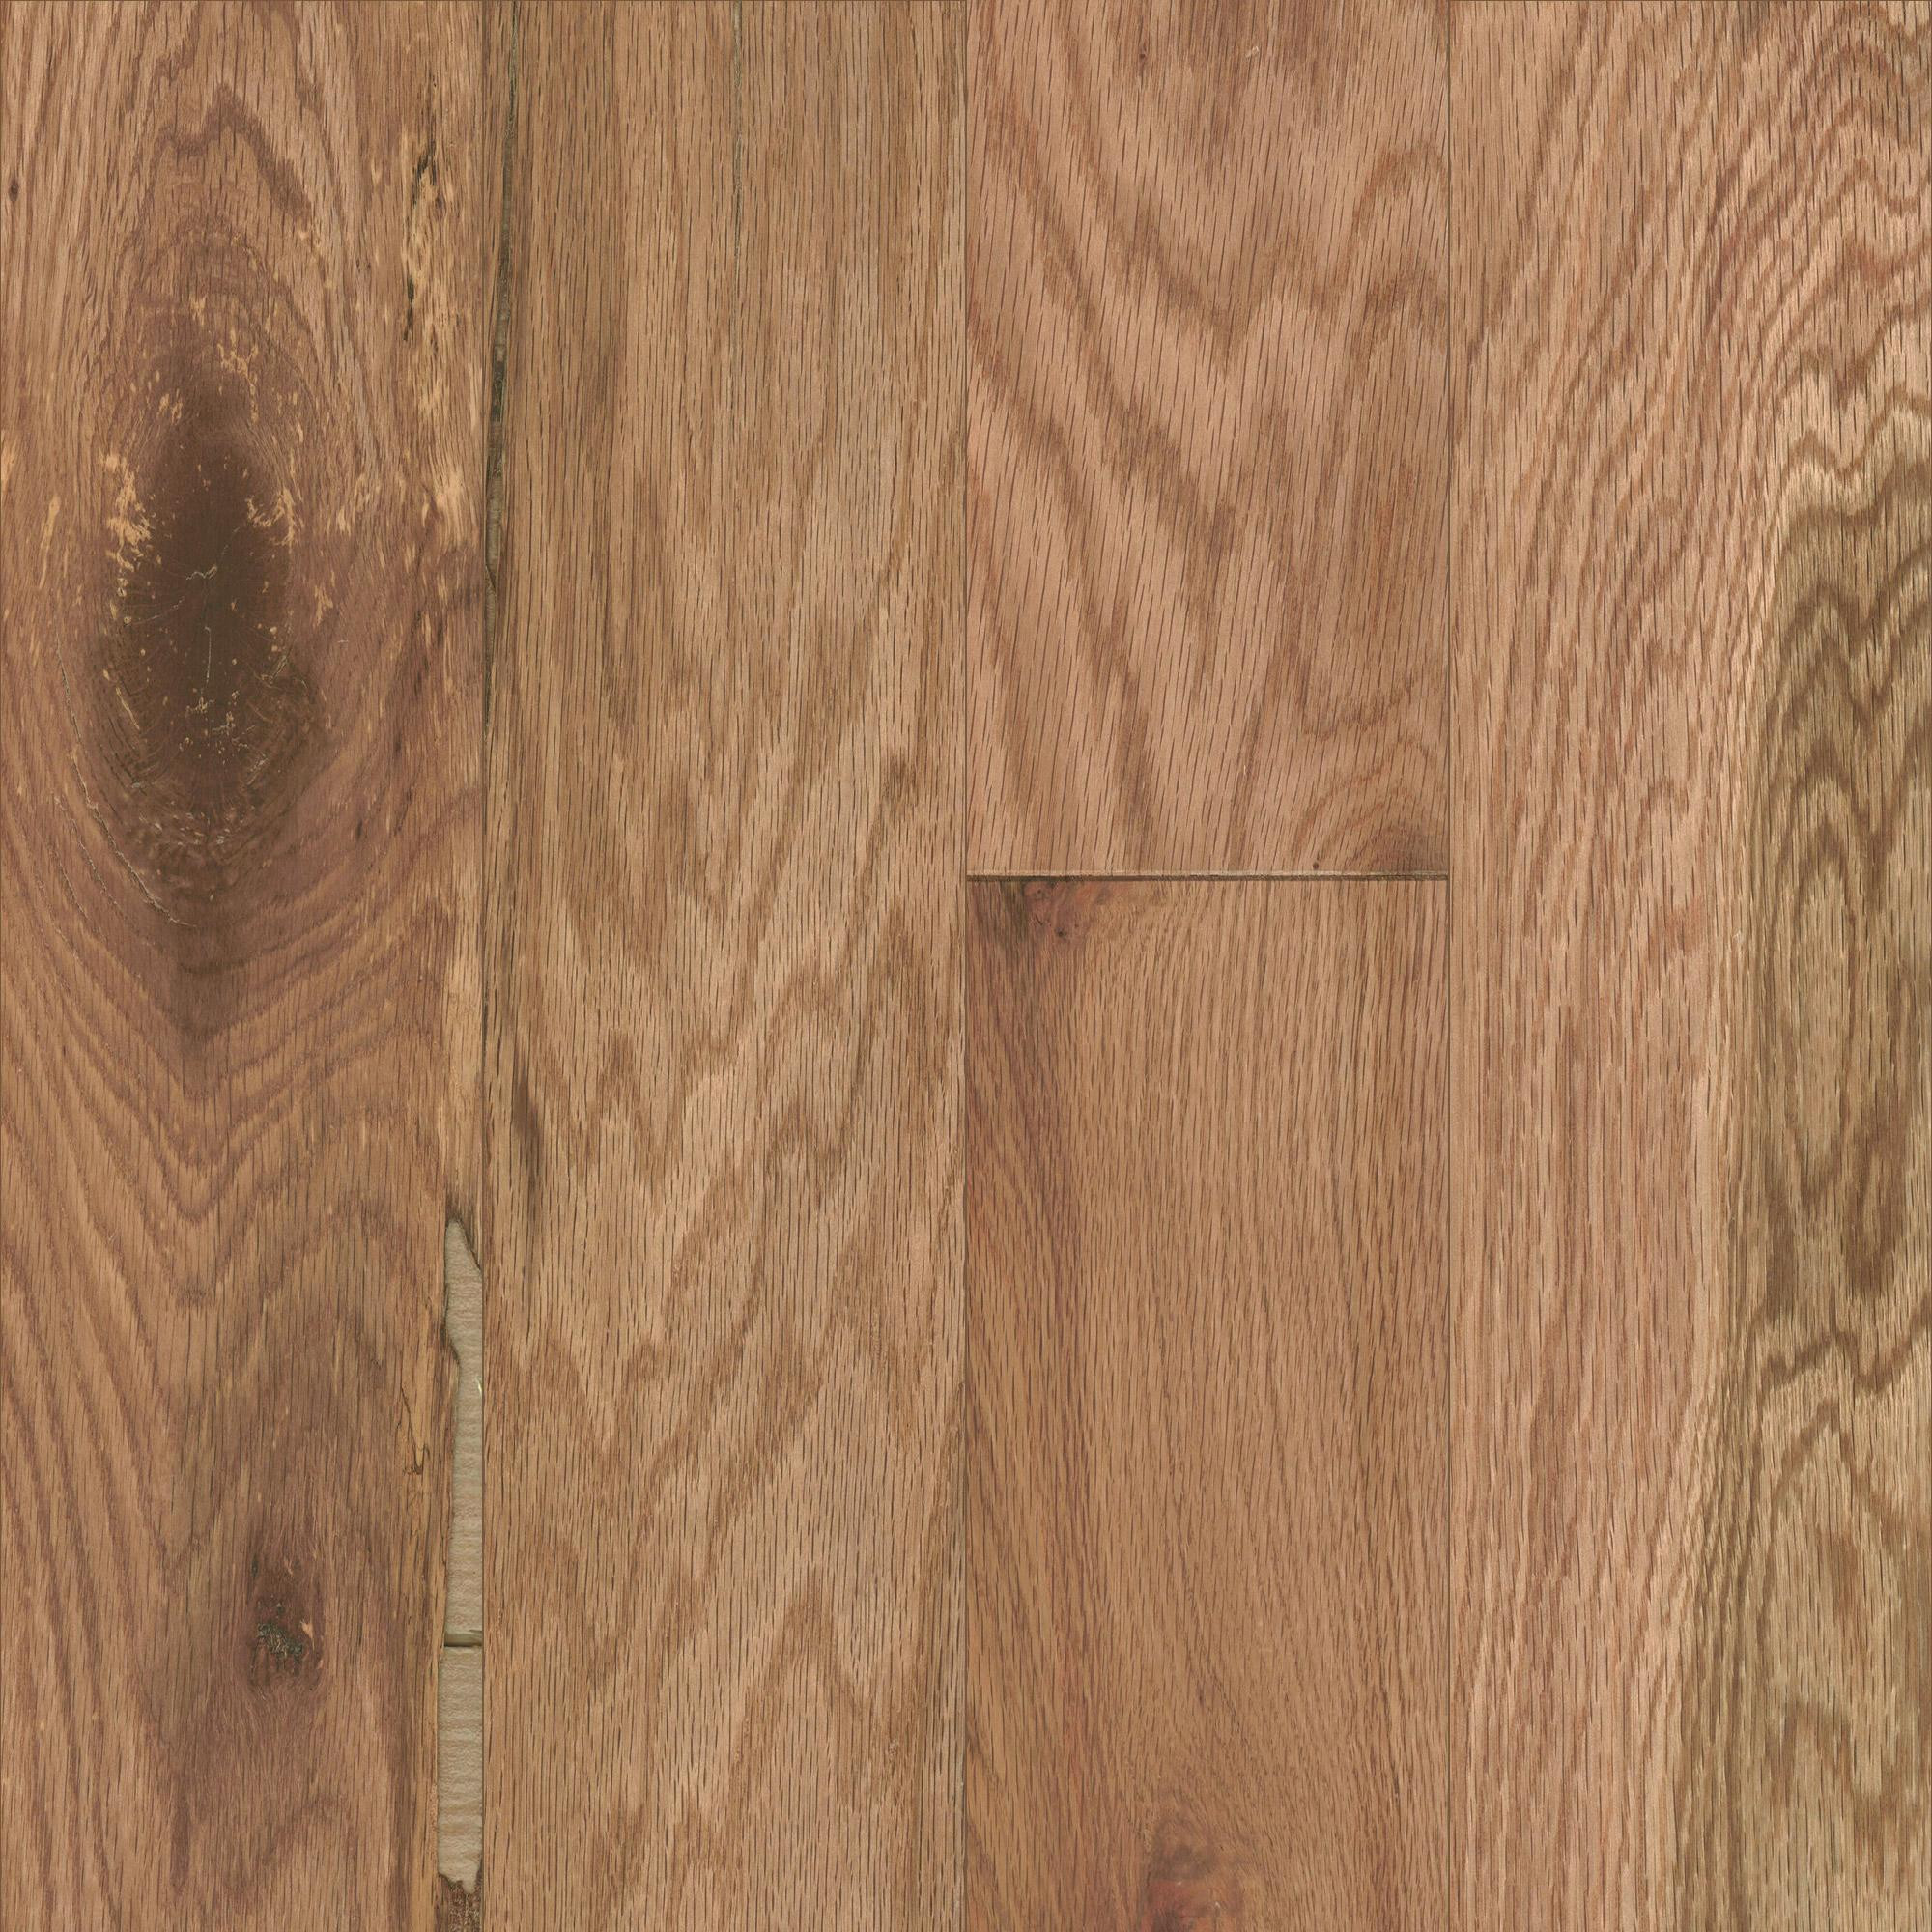 11 Cute 1 1 2 Inch Red Oak Hardwood Flooring 2024 free download 1 1 2 inch red oak hardwood flooring of mullican ridgecrest red oak natural 1 2 thick 5 wide engineered pertaining to mullican ridgecrest red oak natural 1 2 thick 5 wide engineered hardwood